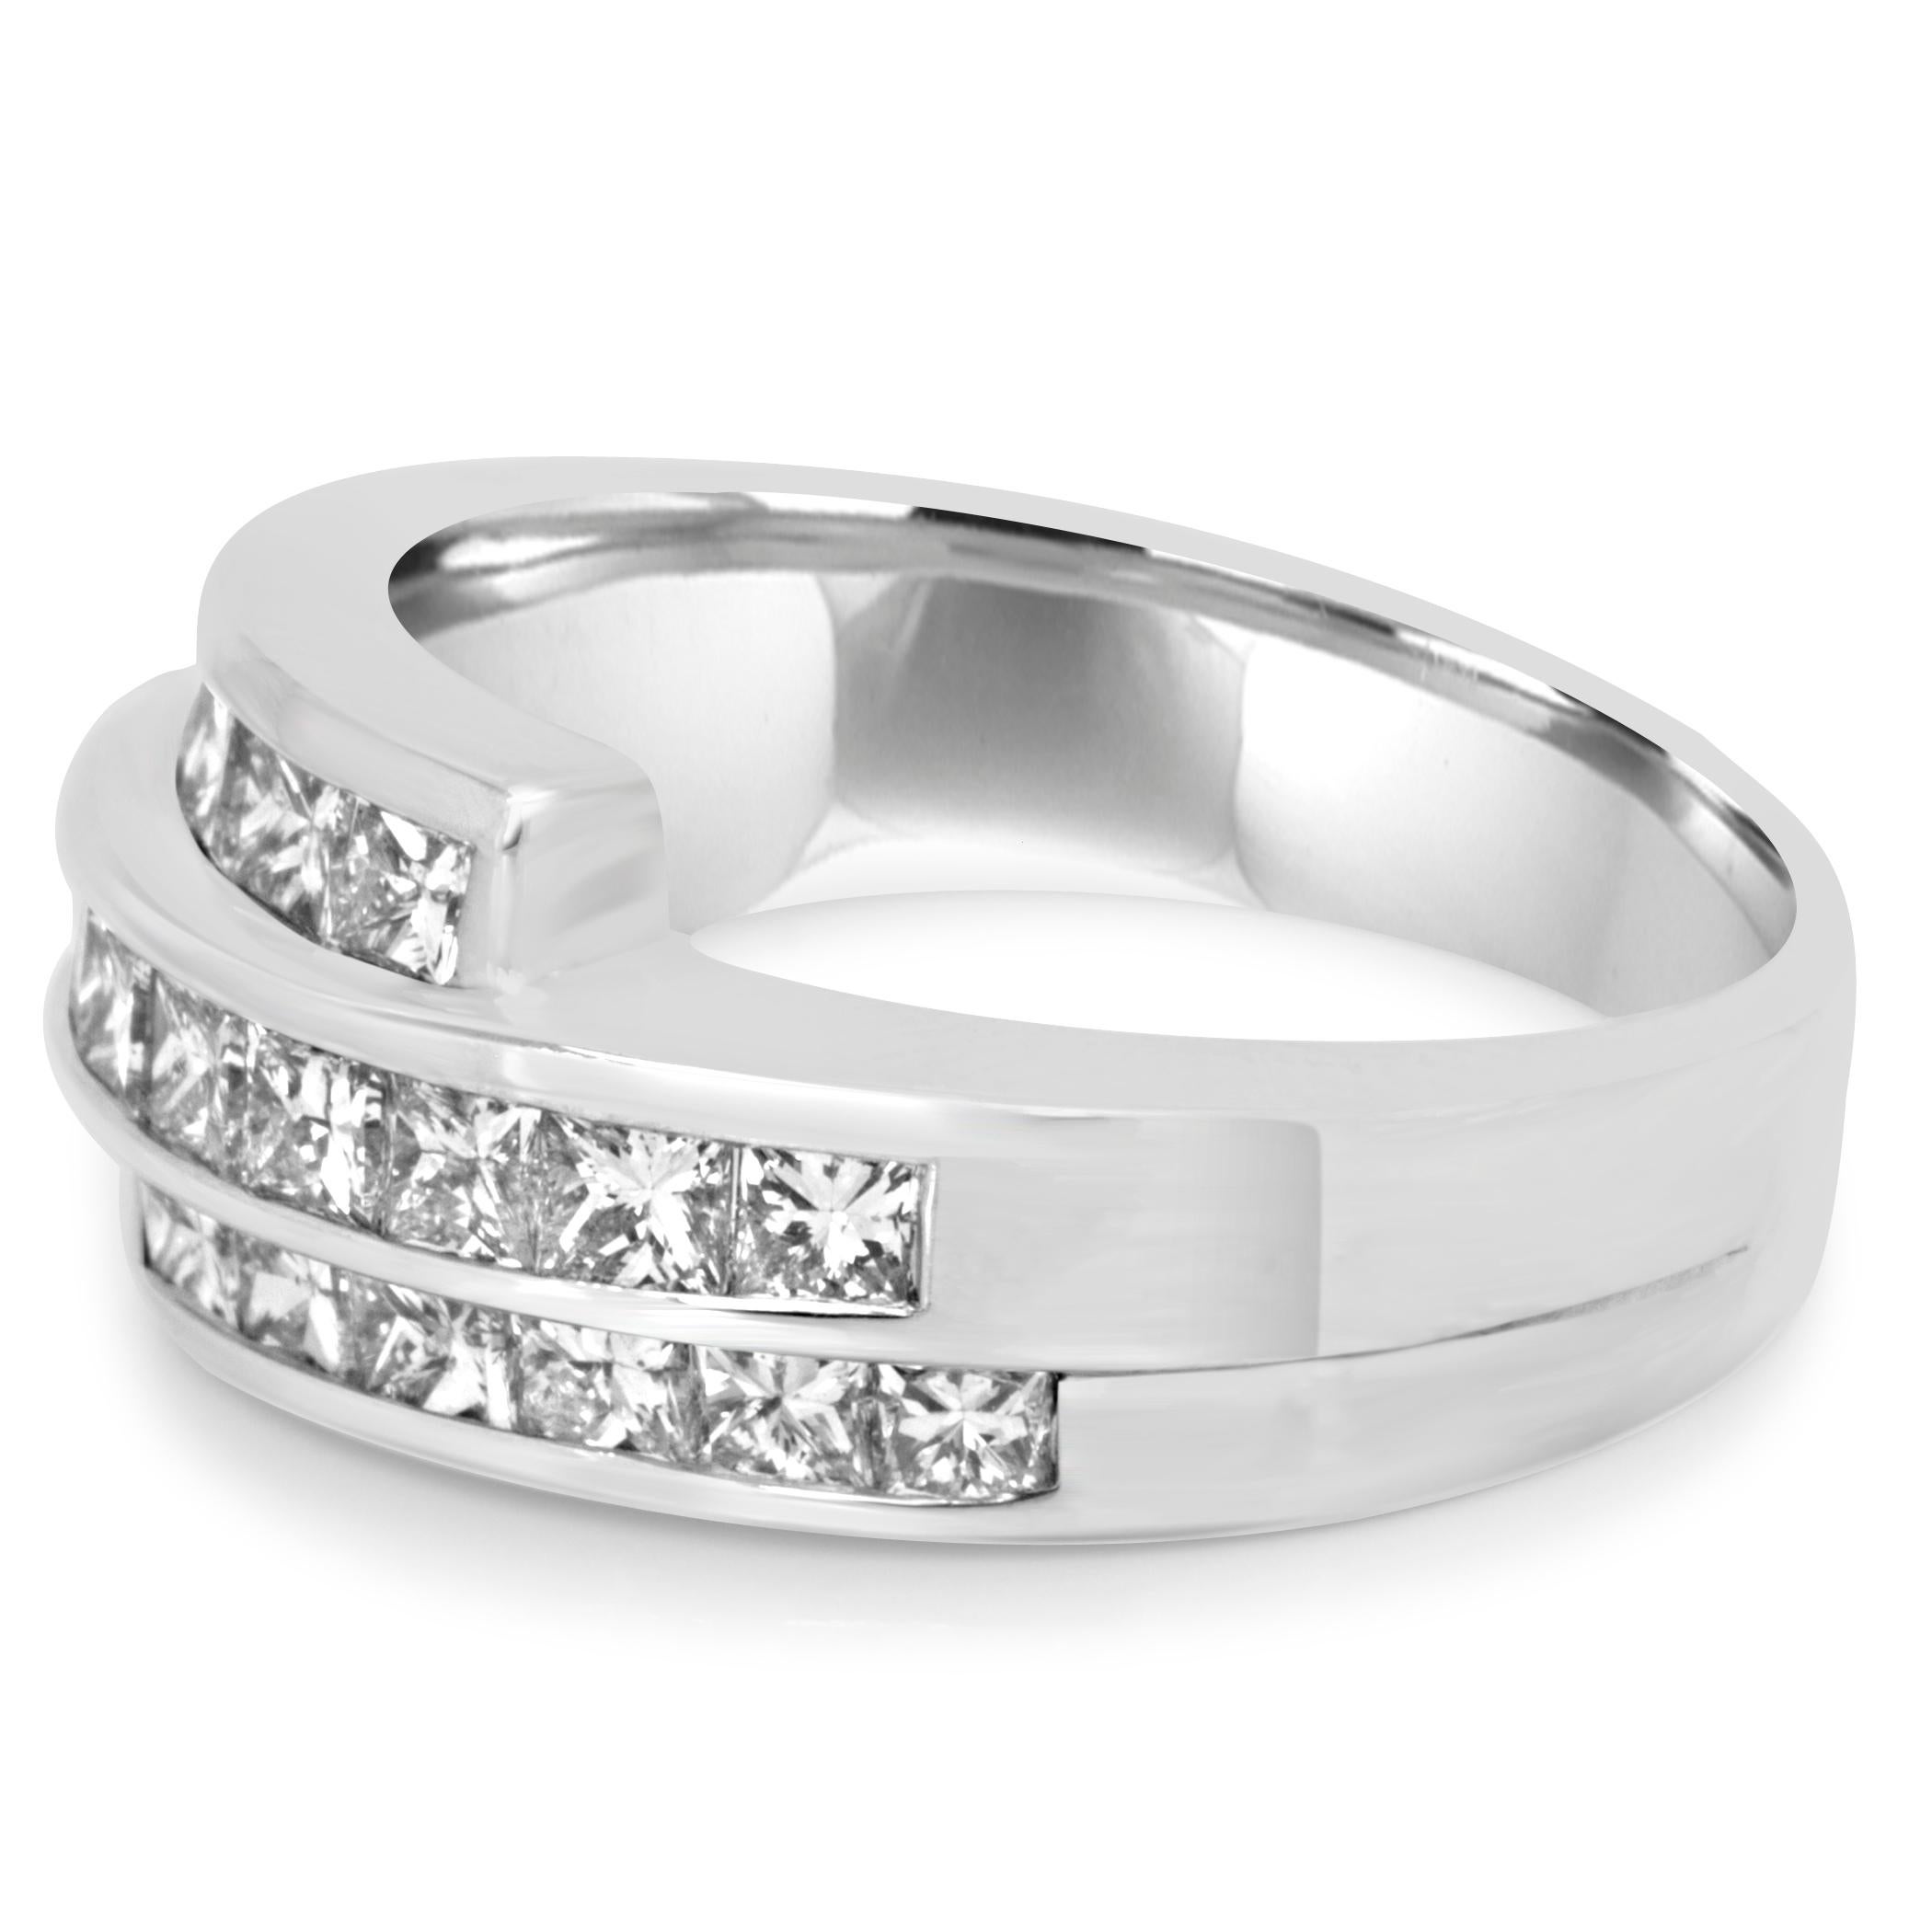 Stunning Cocktail Fashion 14K White Gold Band Ring featuring three row of  21 White G-H Color VS-SI Clarity Princess Cut Diamonds weighing 1.45 Carat perfect for all occasions and everyday wear.

Style available in different price ranges. Prices are